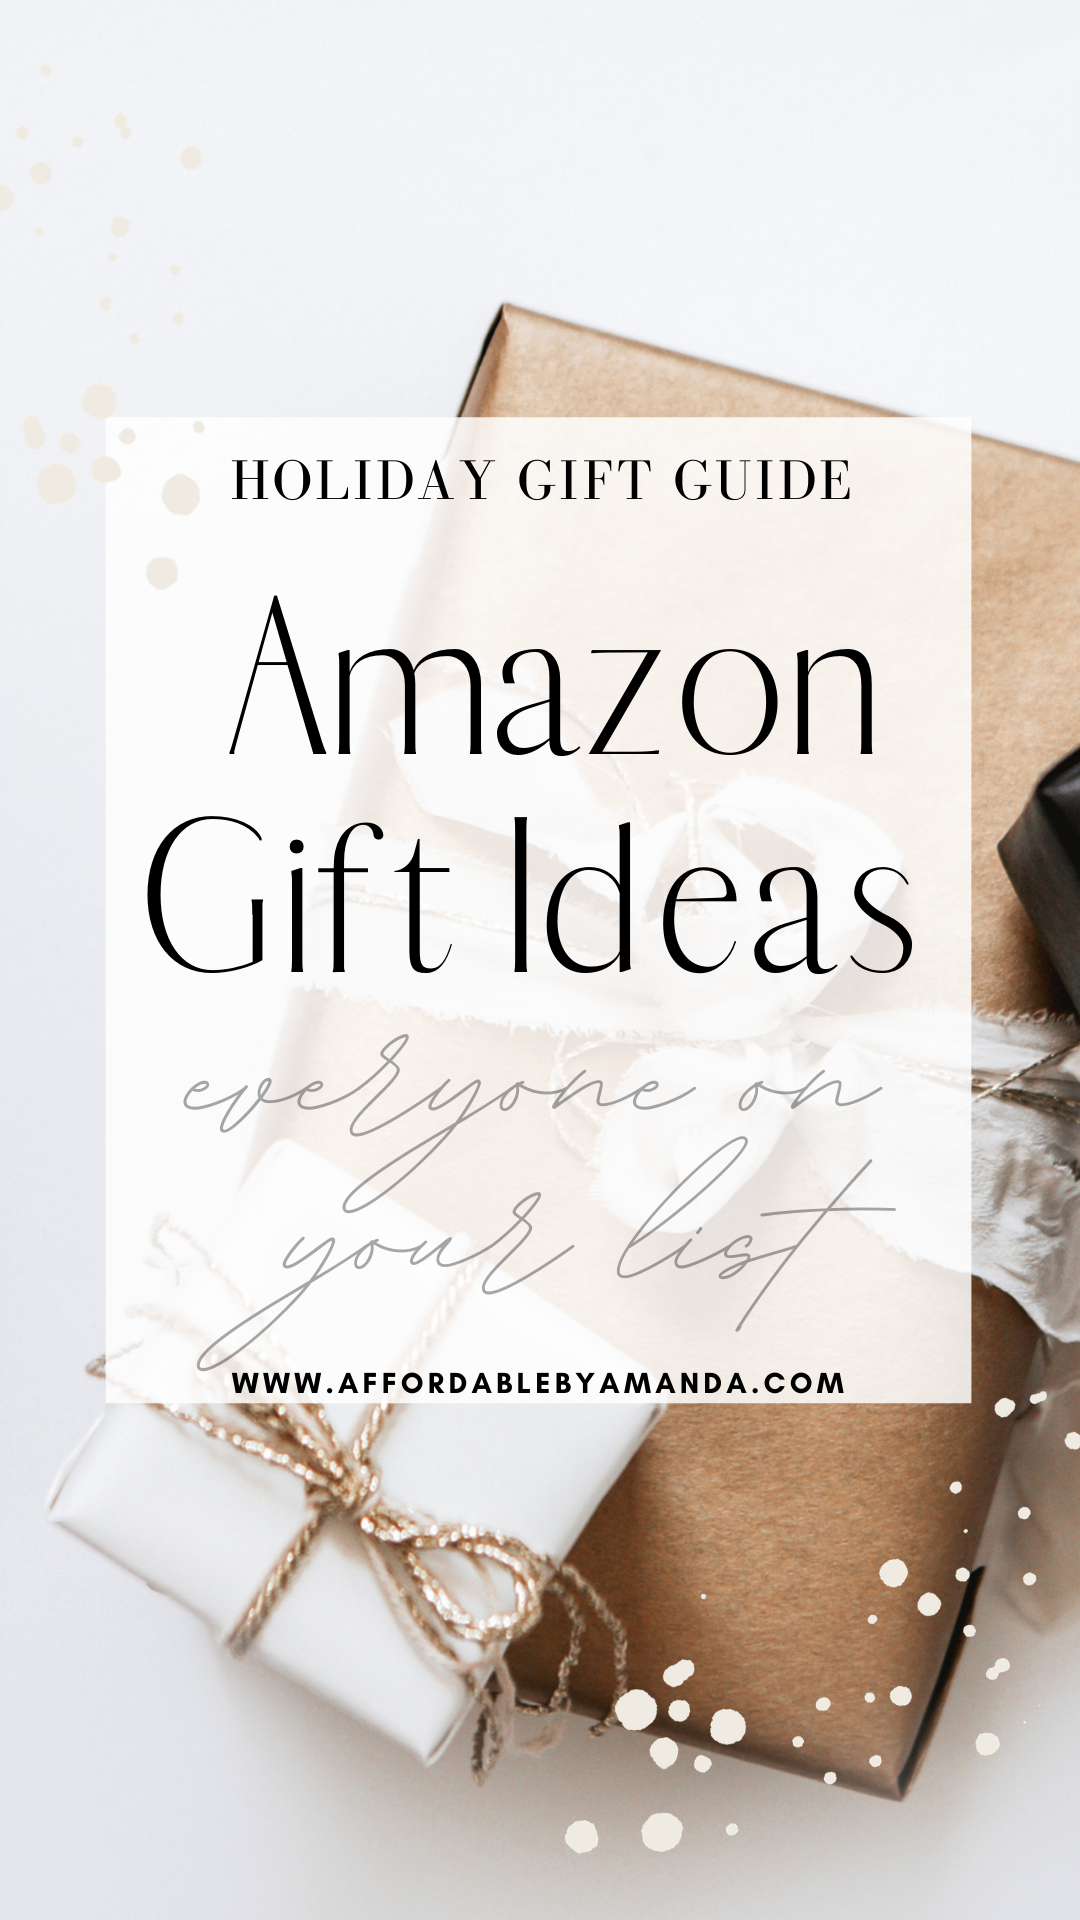 Amazon Gift Ideas - Amazon Gifts for Him - Amazon Gifts for Her 